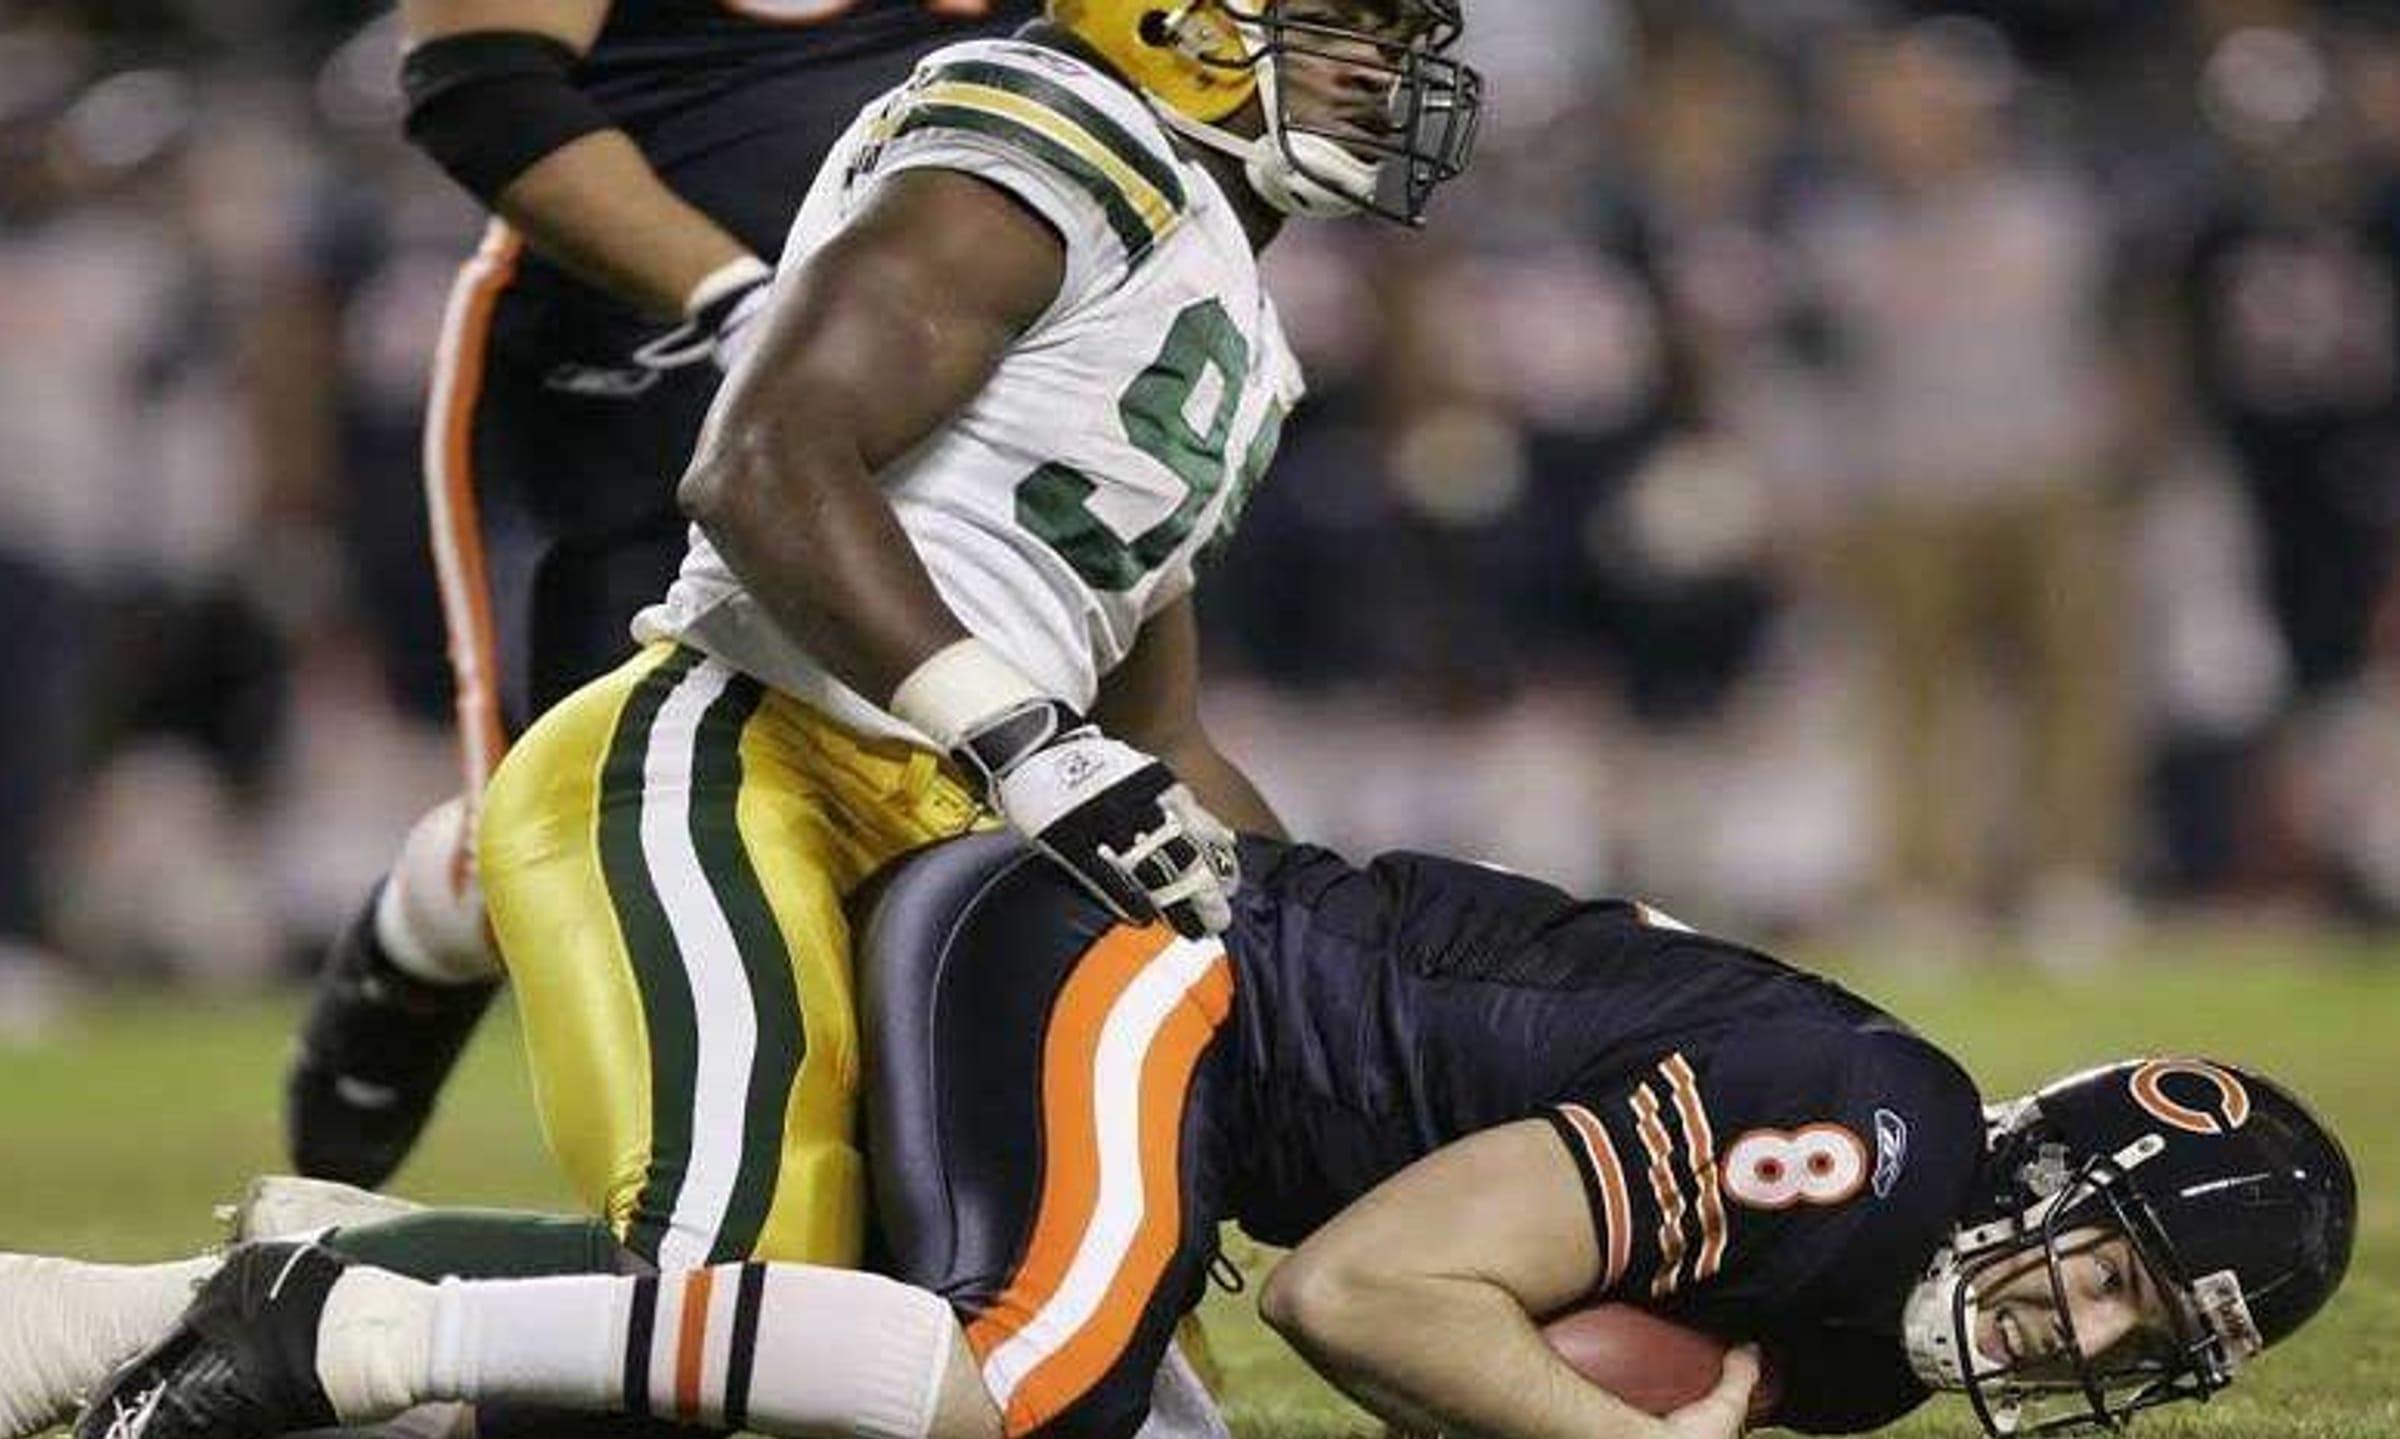 The Funniest Most Awkward Nfl Photos Ever Taken